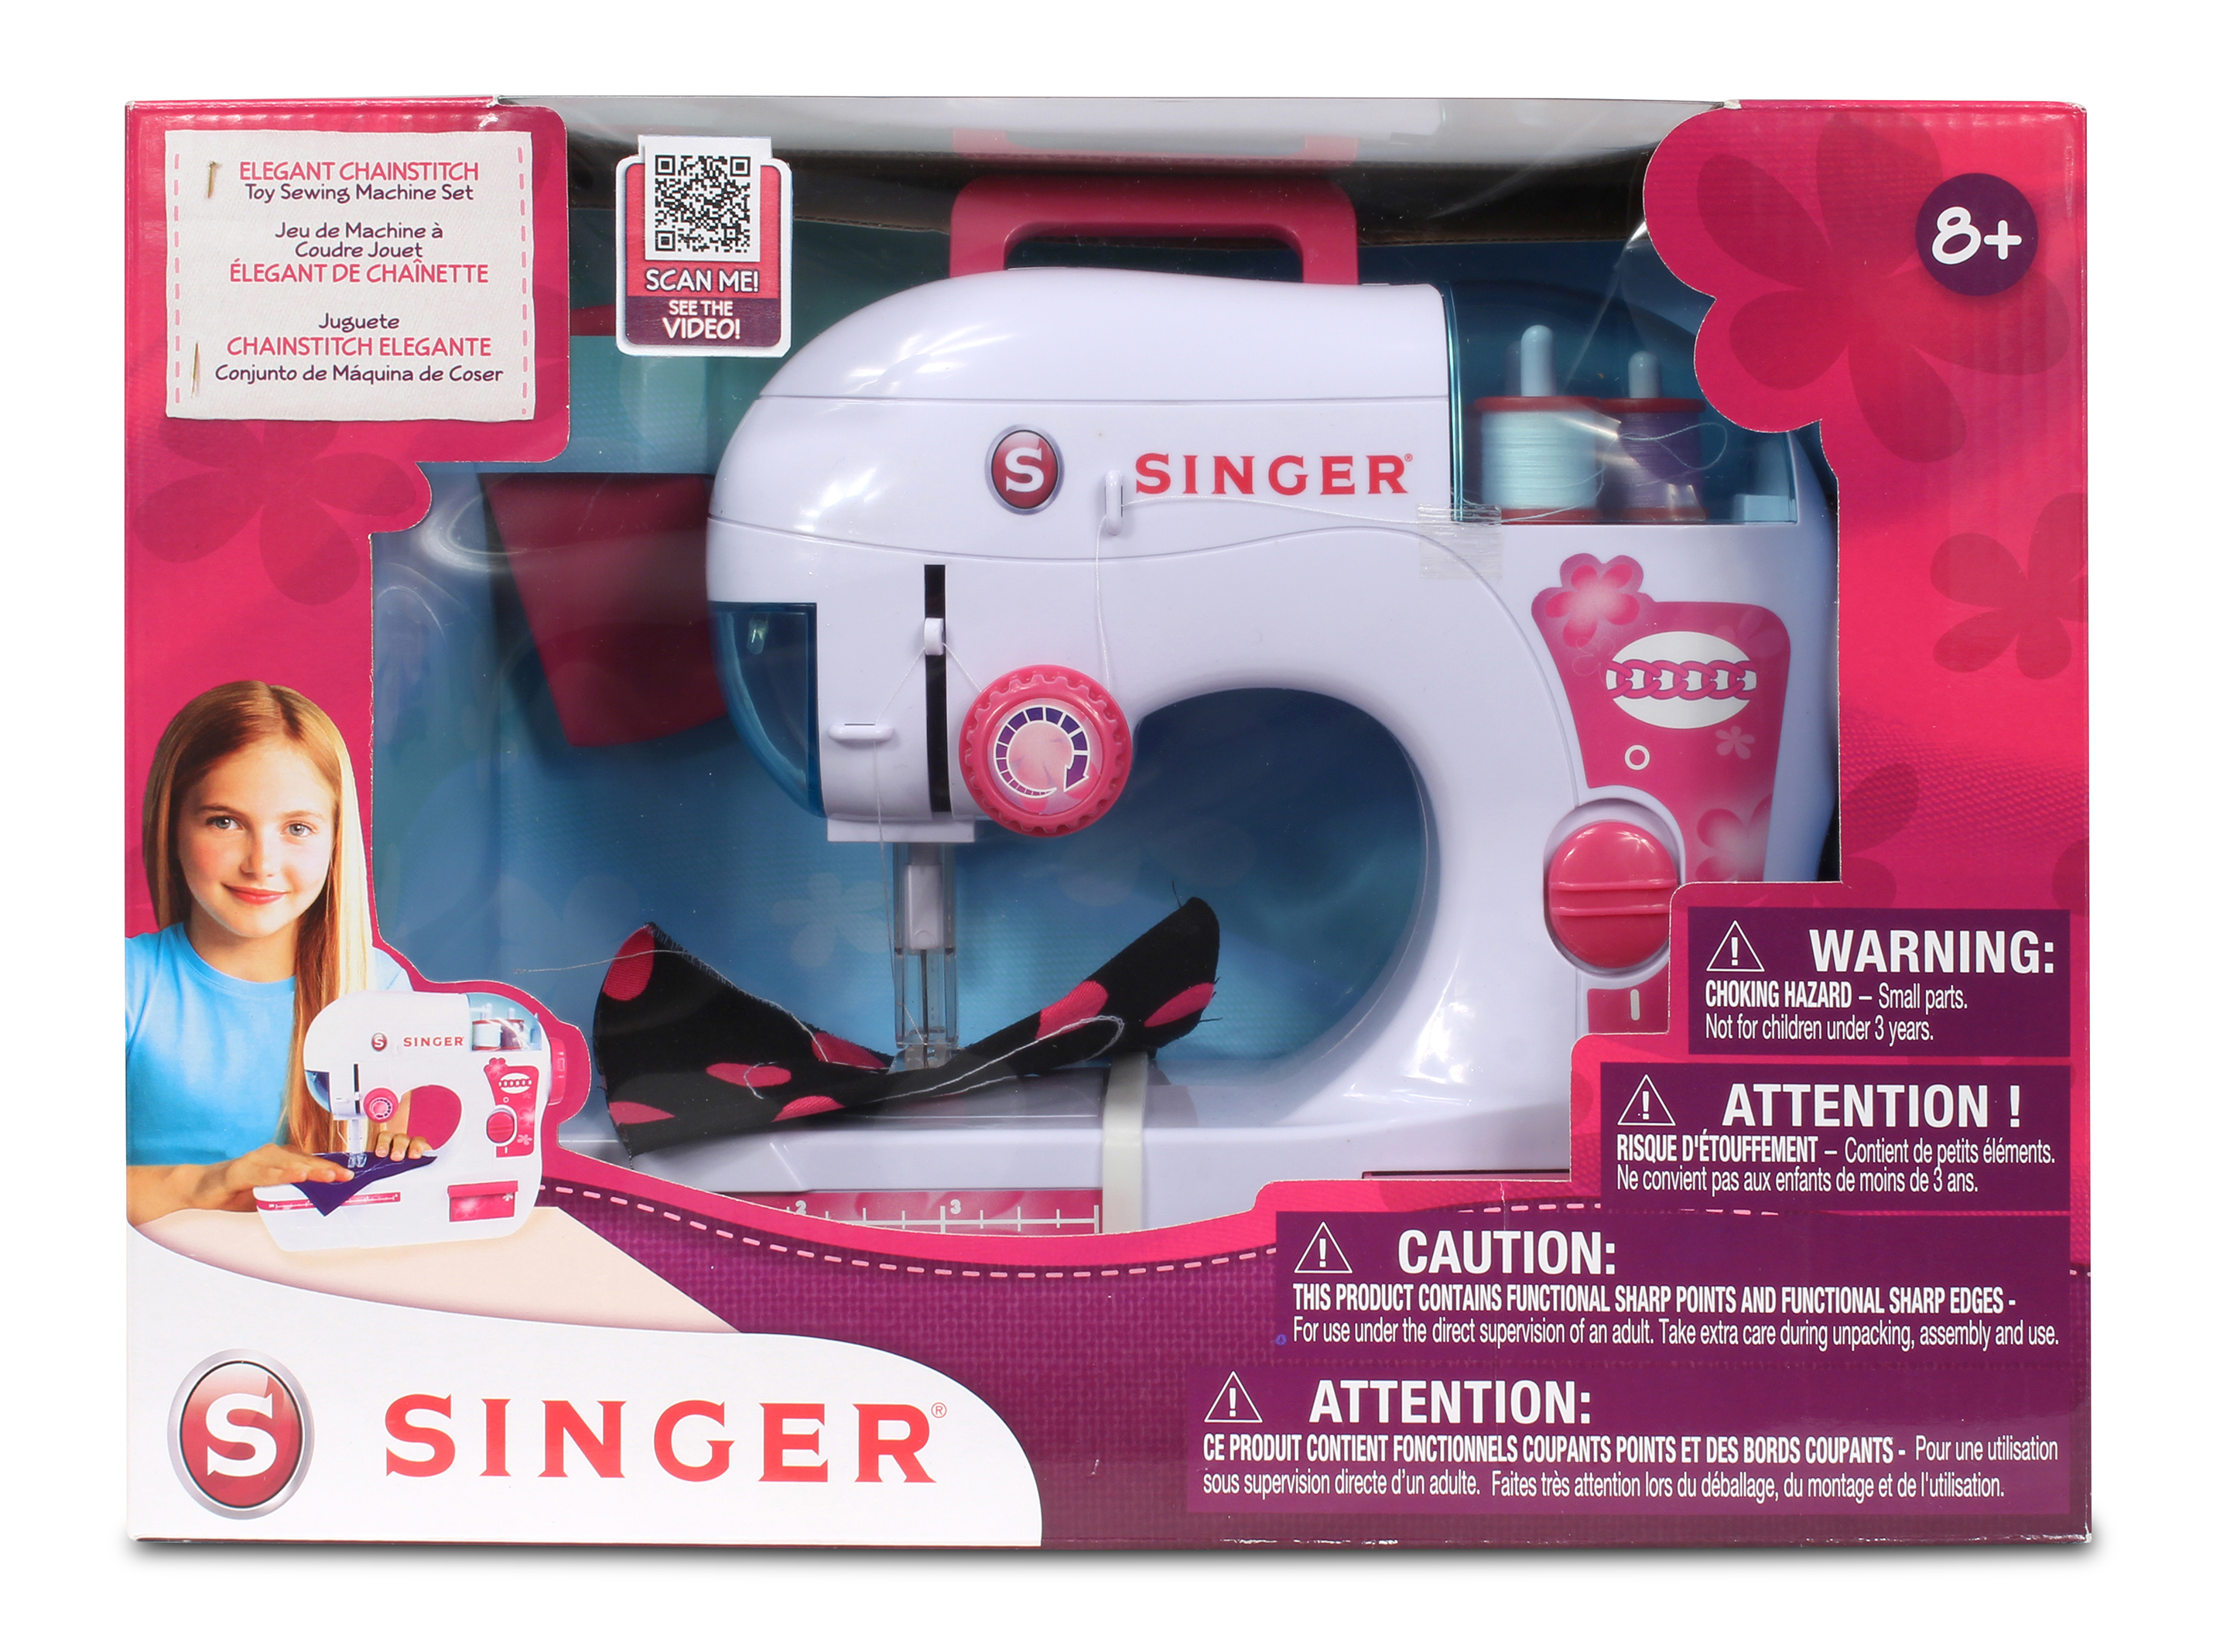 Singer Elegant Chainstitch Sewing Machine with Foot Pedal - image 2 of 3